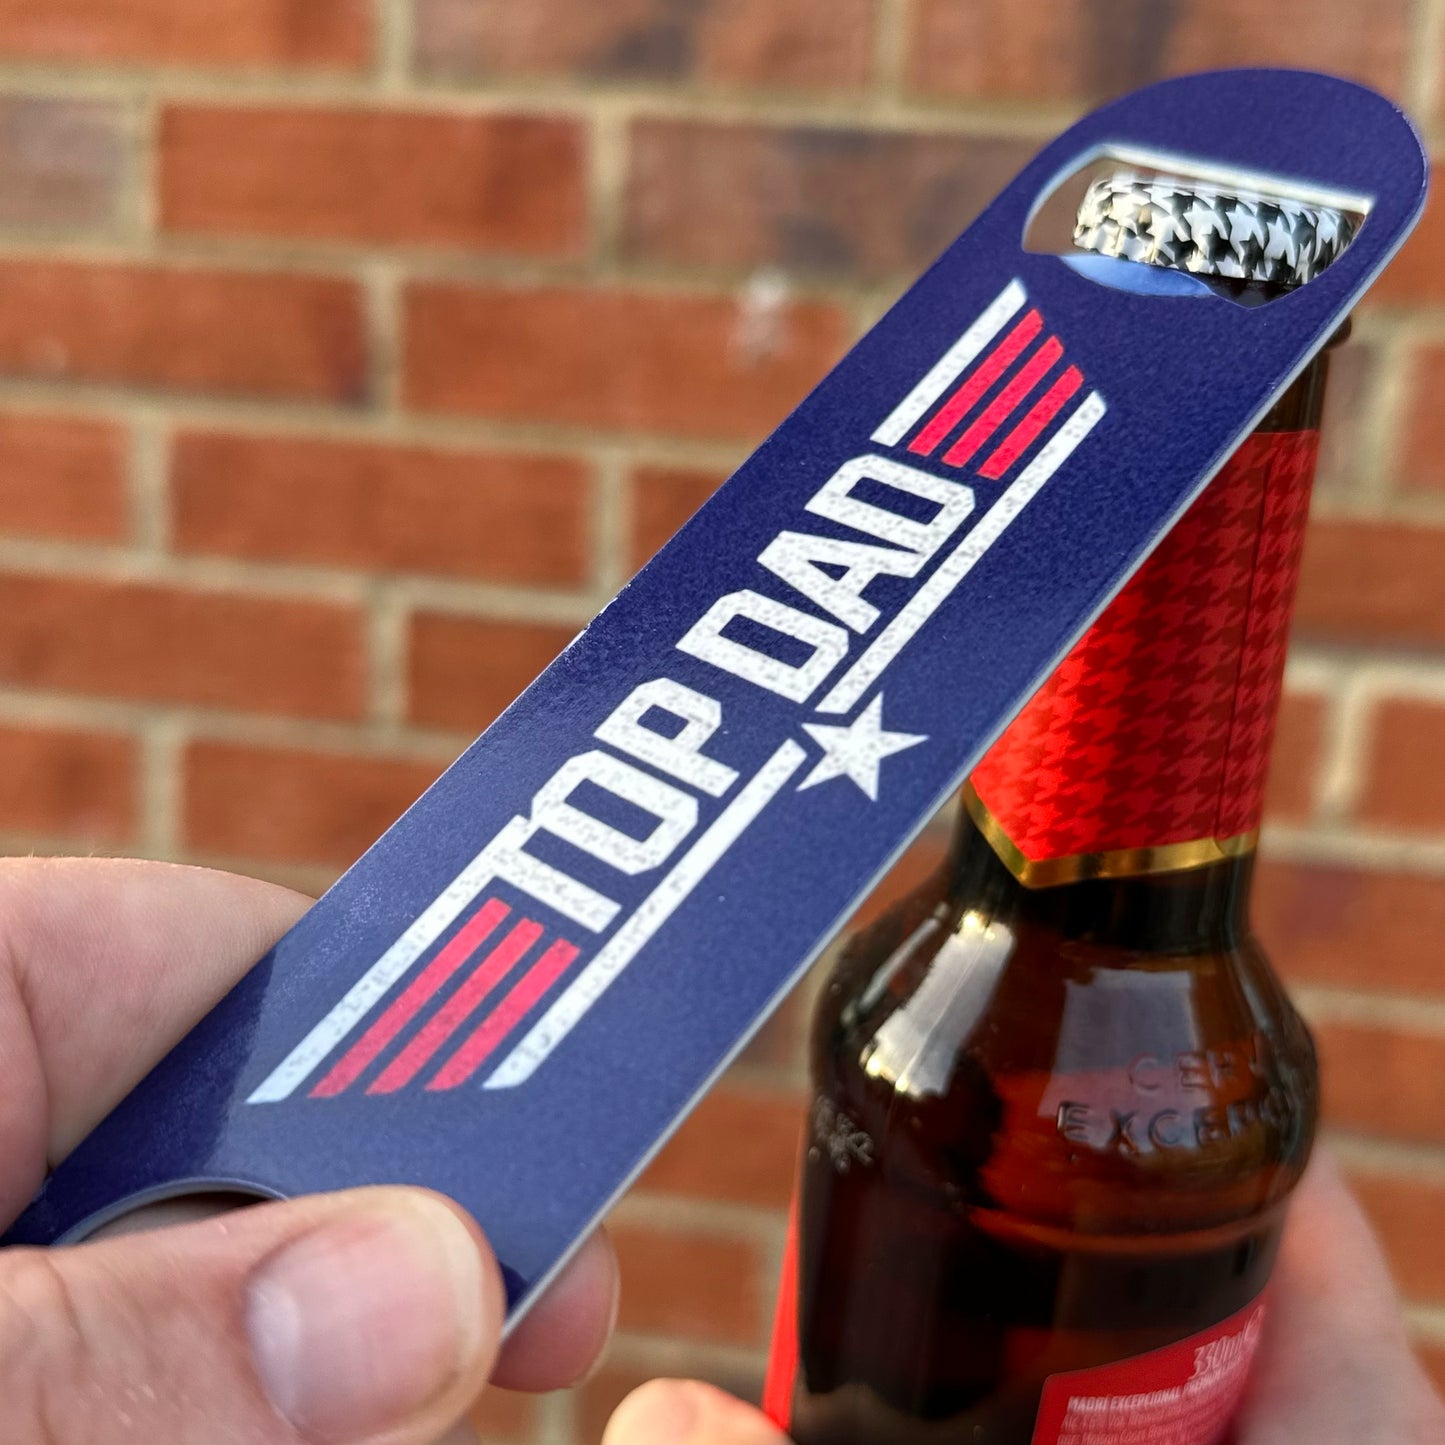 Top Dad Bottle Opener Father's Day Birthday Gift for Him